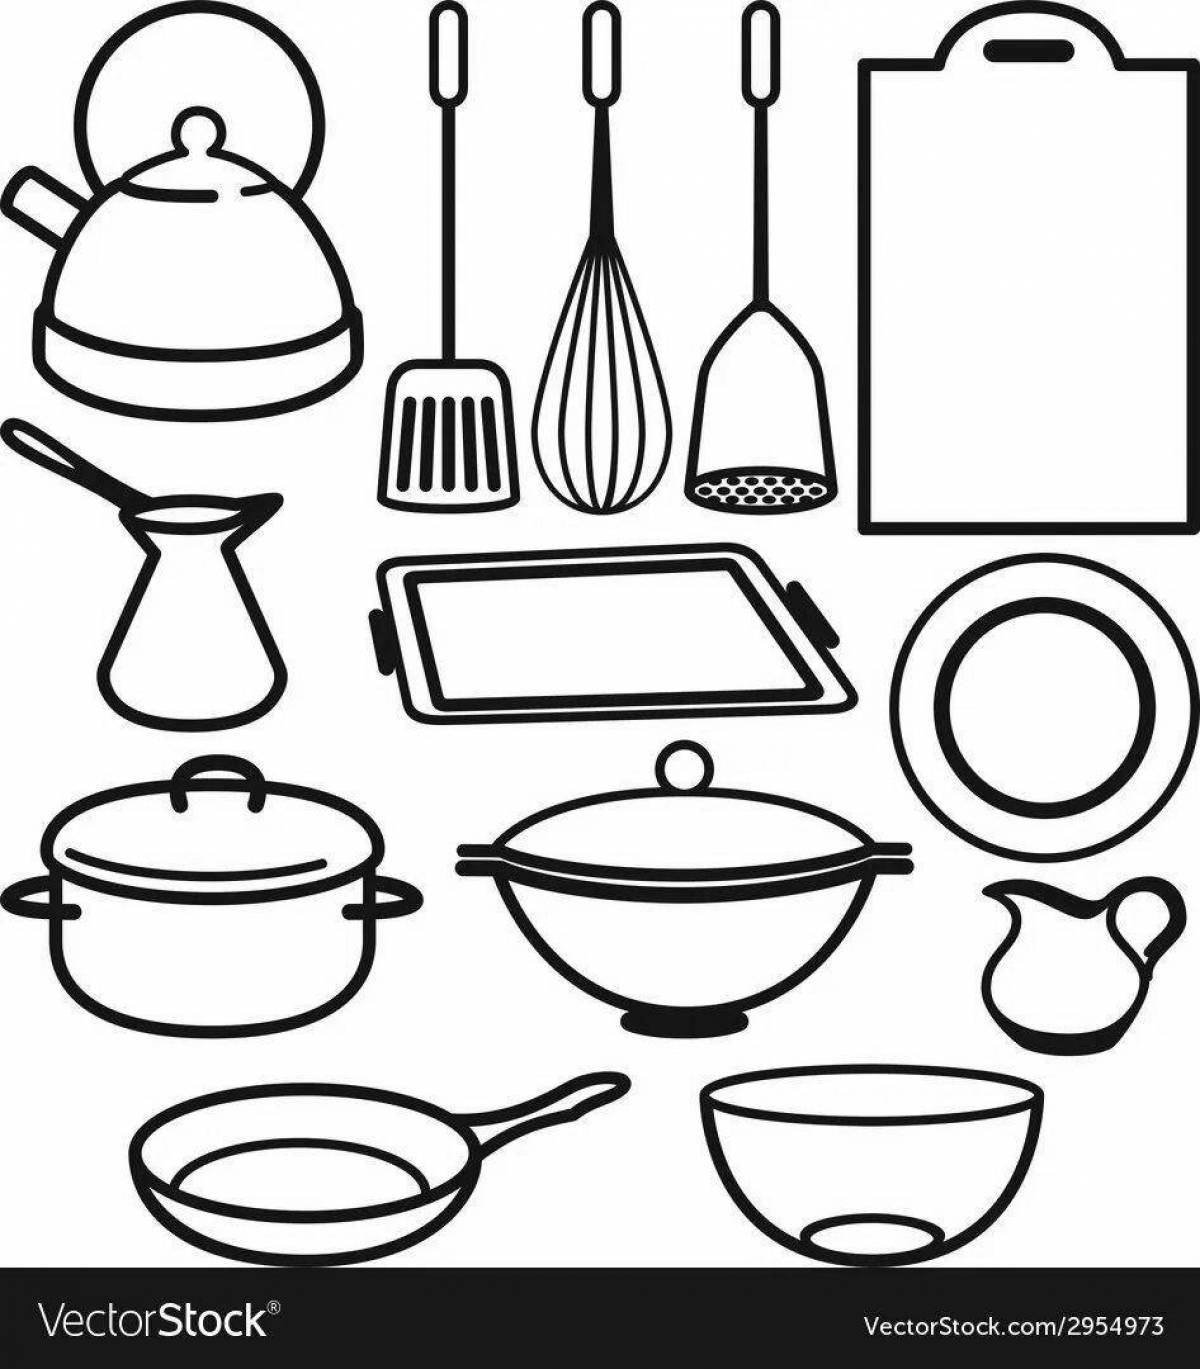 Adorable kitchen utensils coloring book for kids